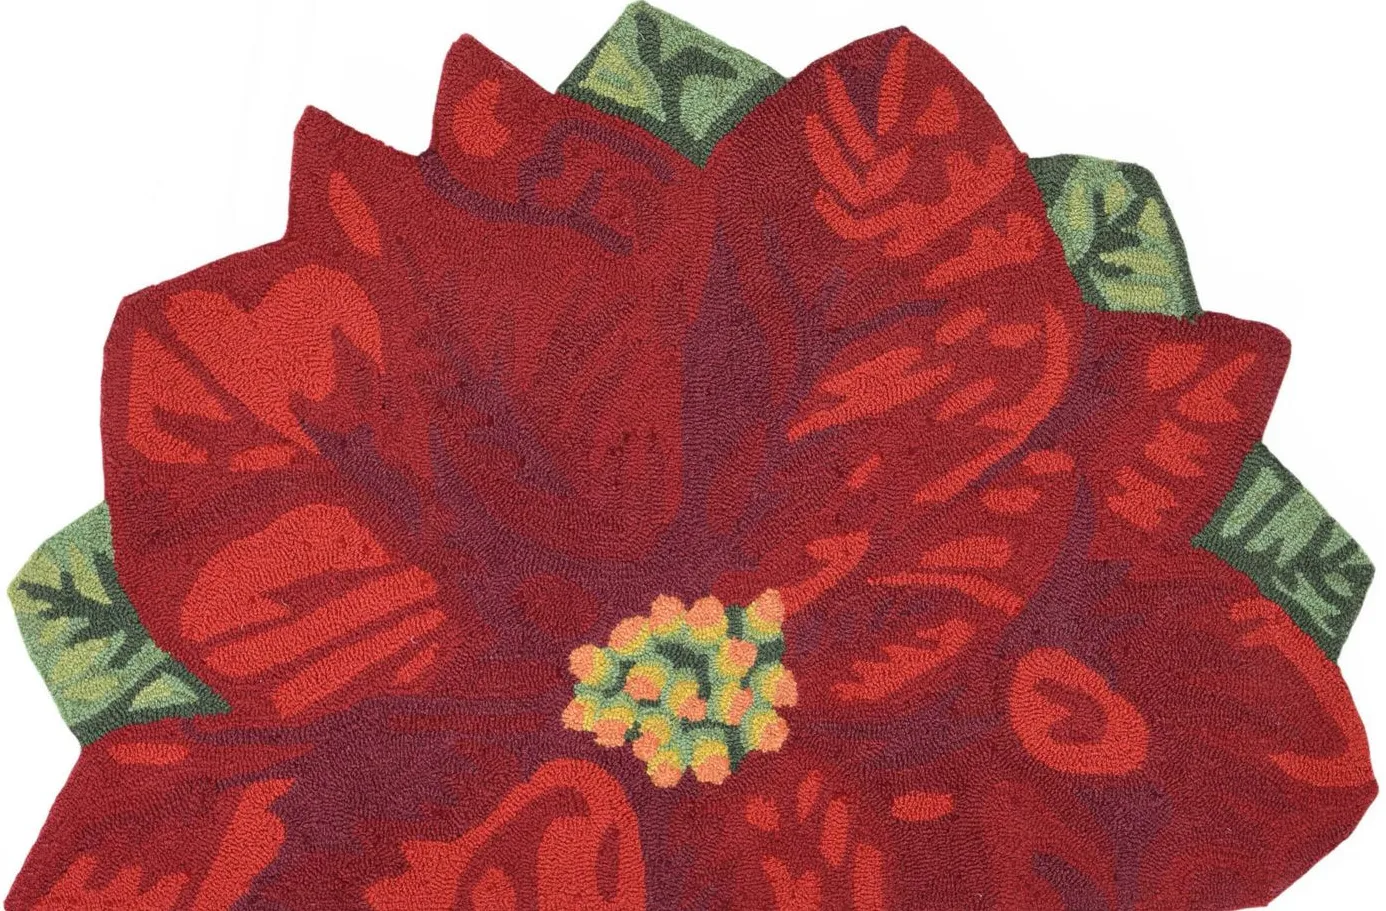 Liora Manne Poinsettia Front Porch Rug in Red by Trans-Ocean Import Co Inc